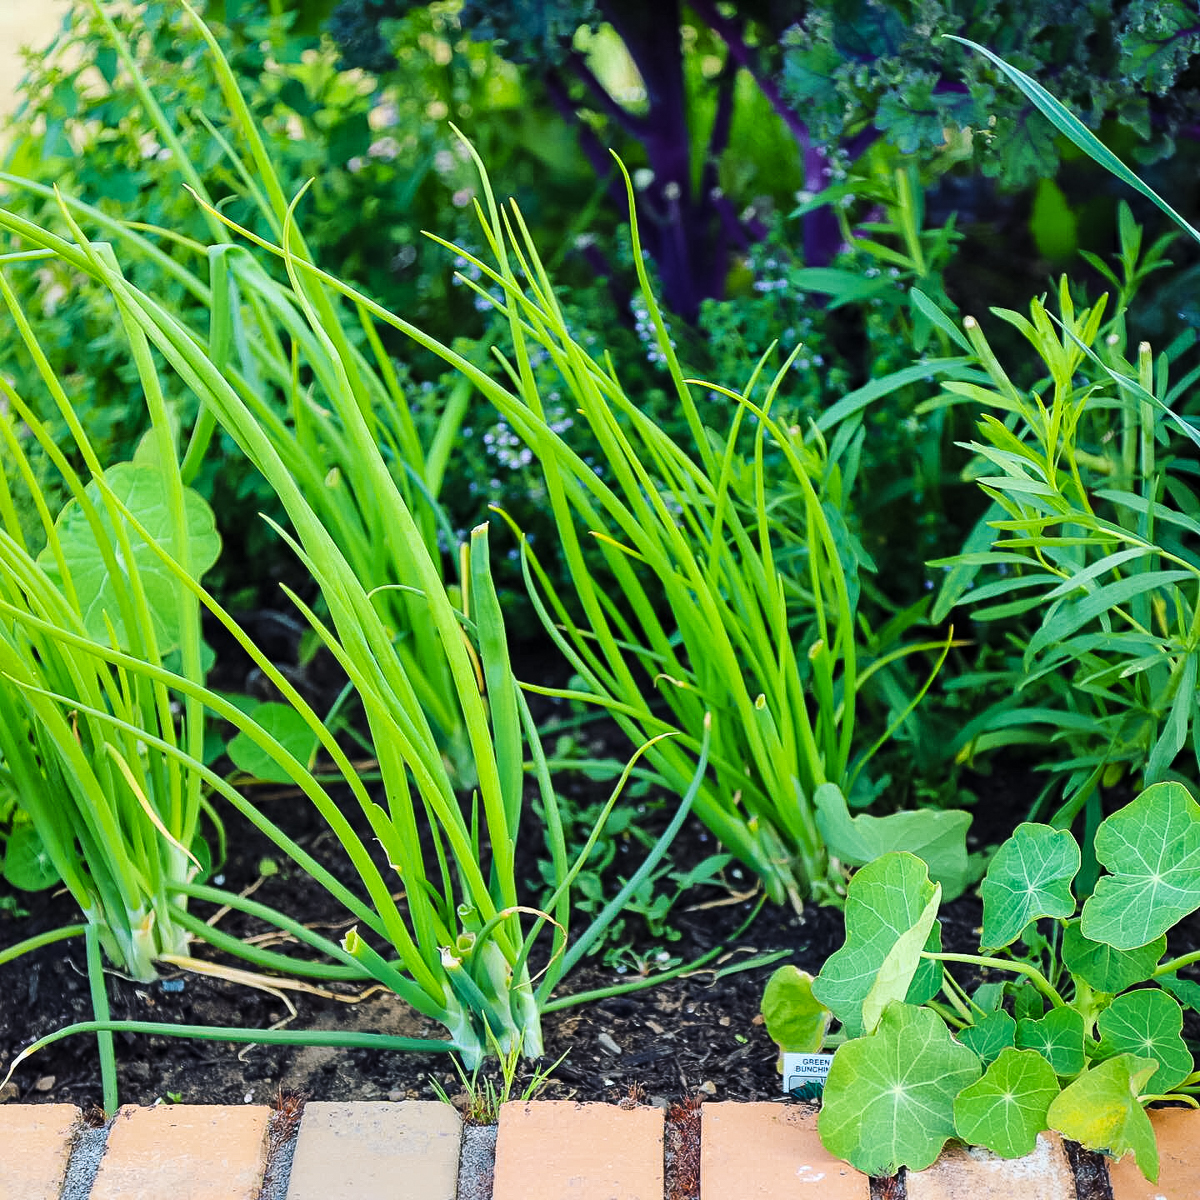 Green bunches of chives growing in a garden with various herbs and nasturtium greens growing around them.